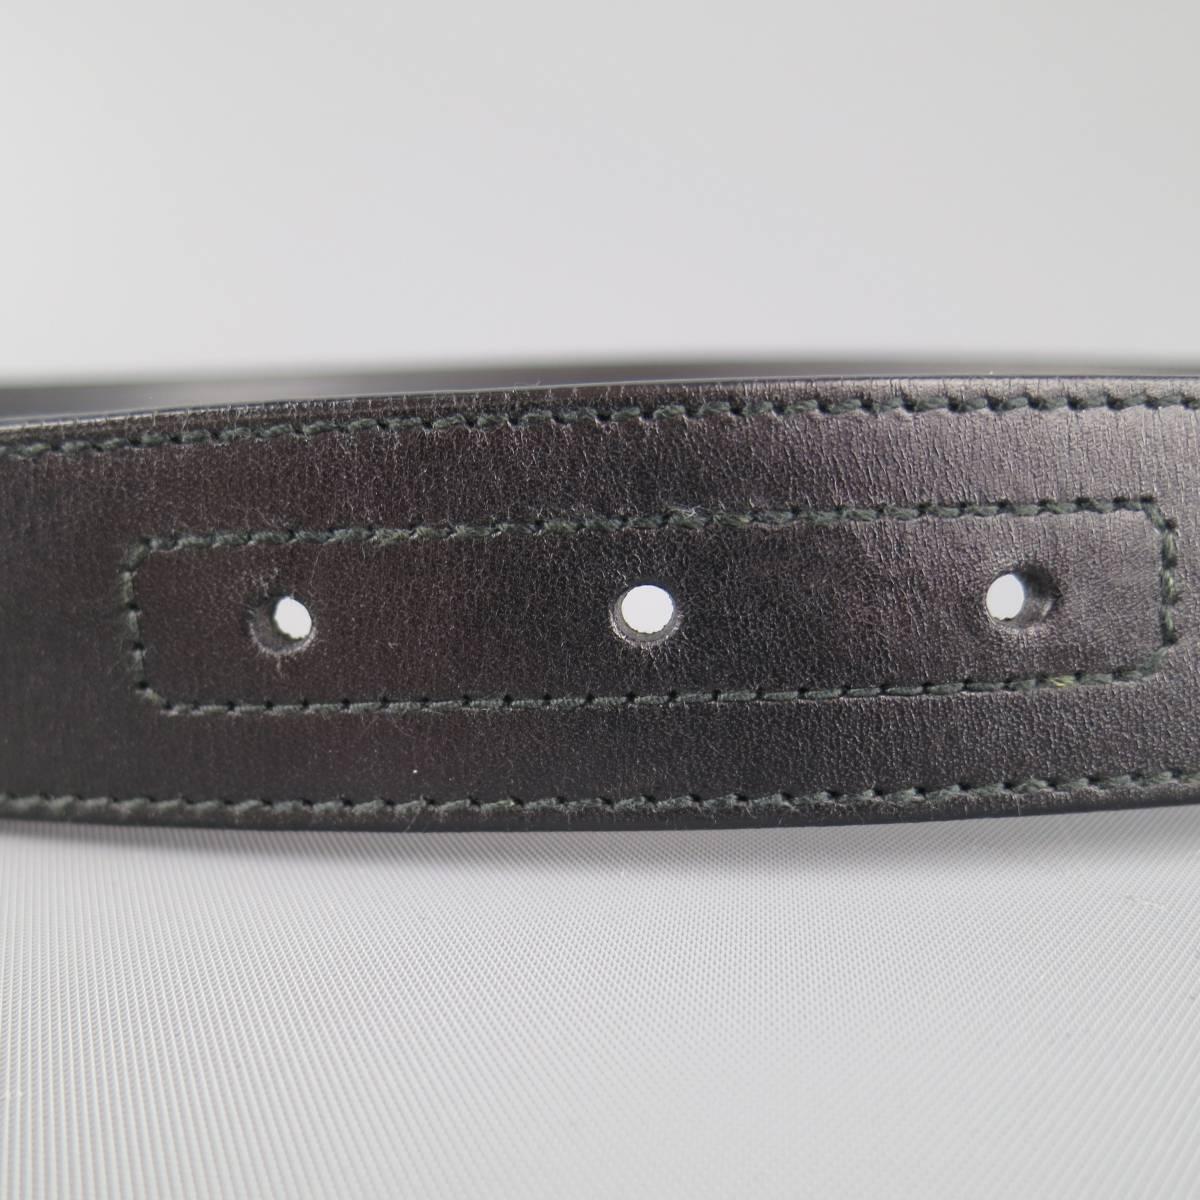 GUCCI belt features a smooth black leather strap and silver tone mini double G buckle. Made in Italy.
 
Good Pre-Owned Condition.
Marked: 90.36
 
Length: 42 in.
Width: 1.25 in.
Fits: 35-37 in.
Buckle: 2 x 1.75 in.